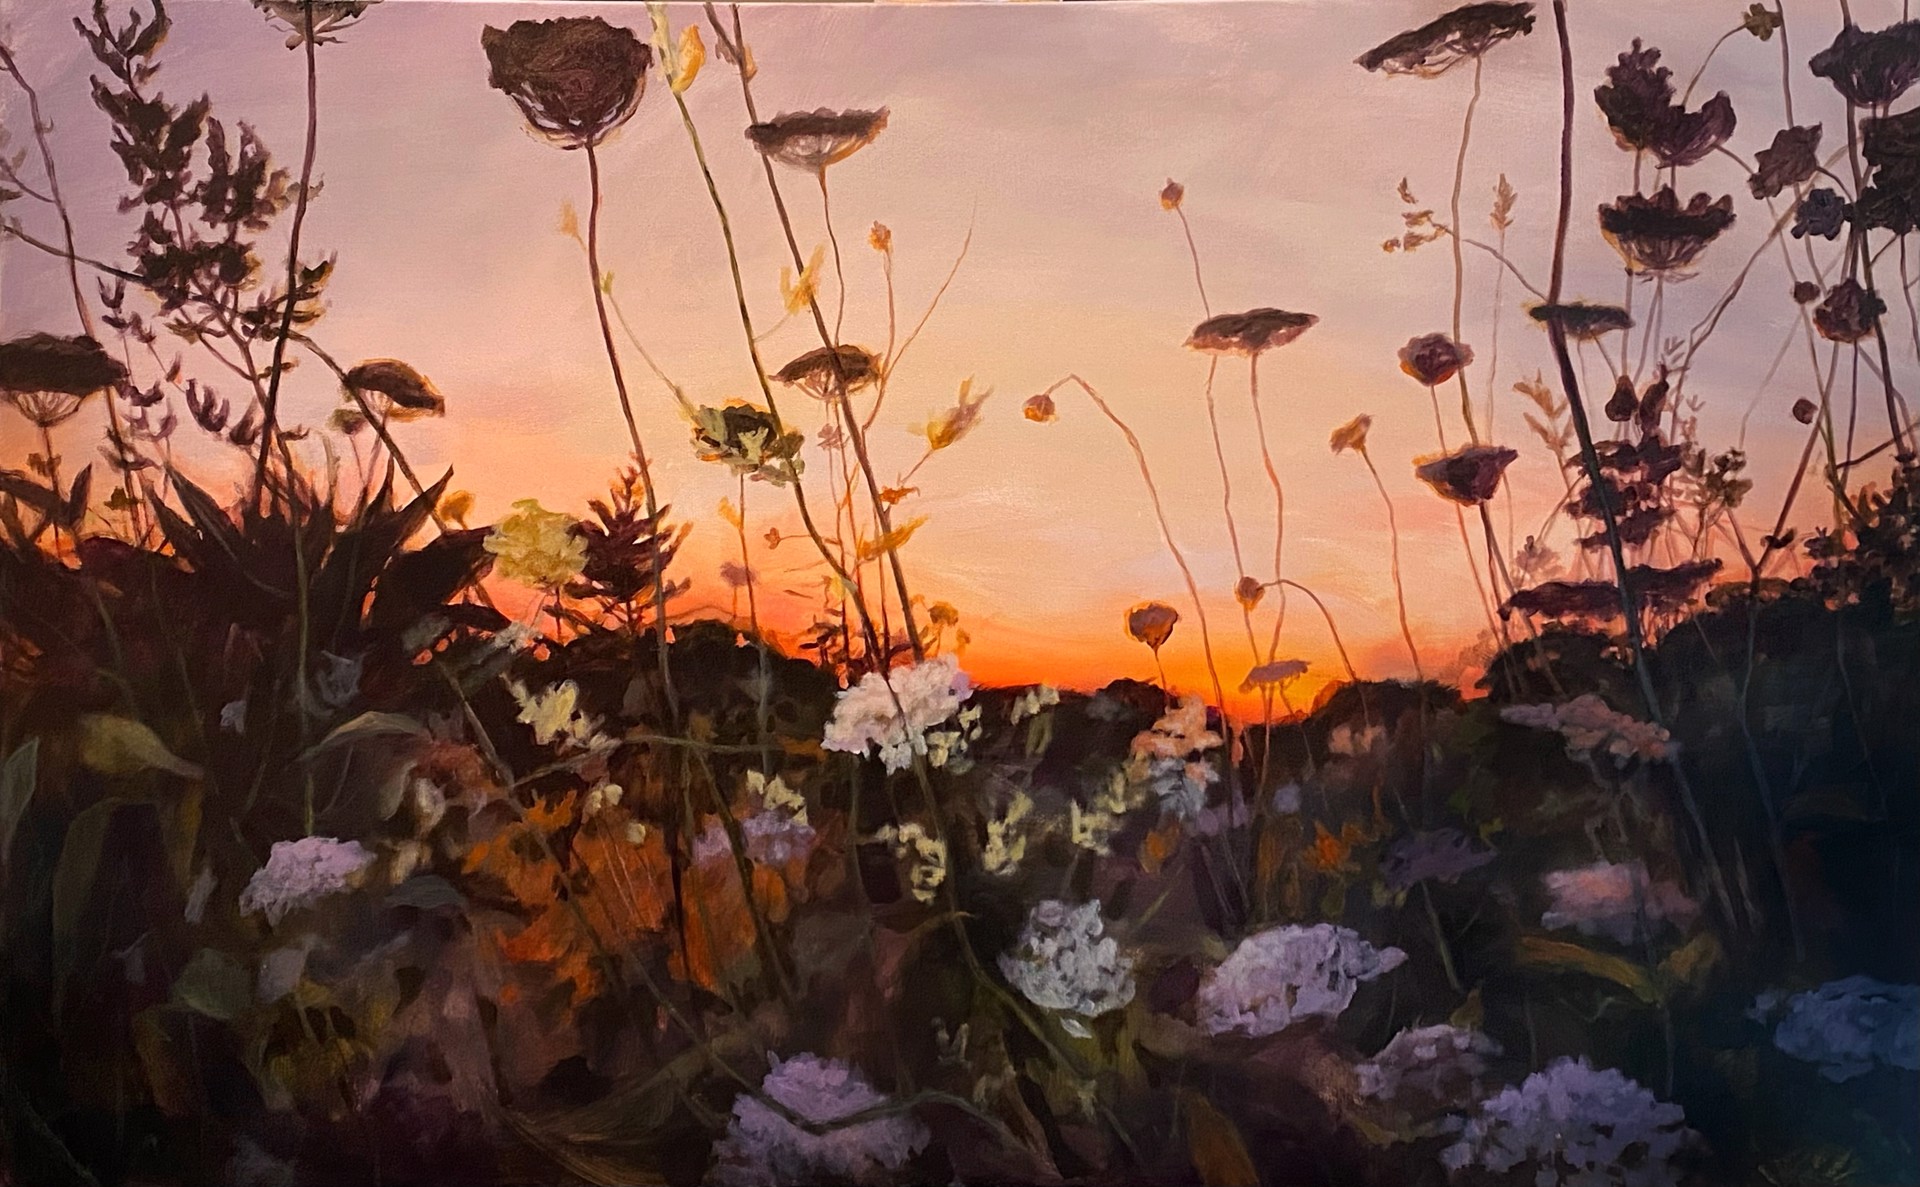 Queen Anne's Lace by Emma Ballou